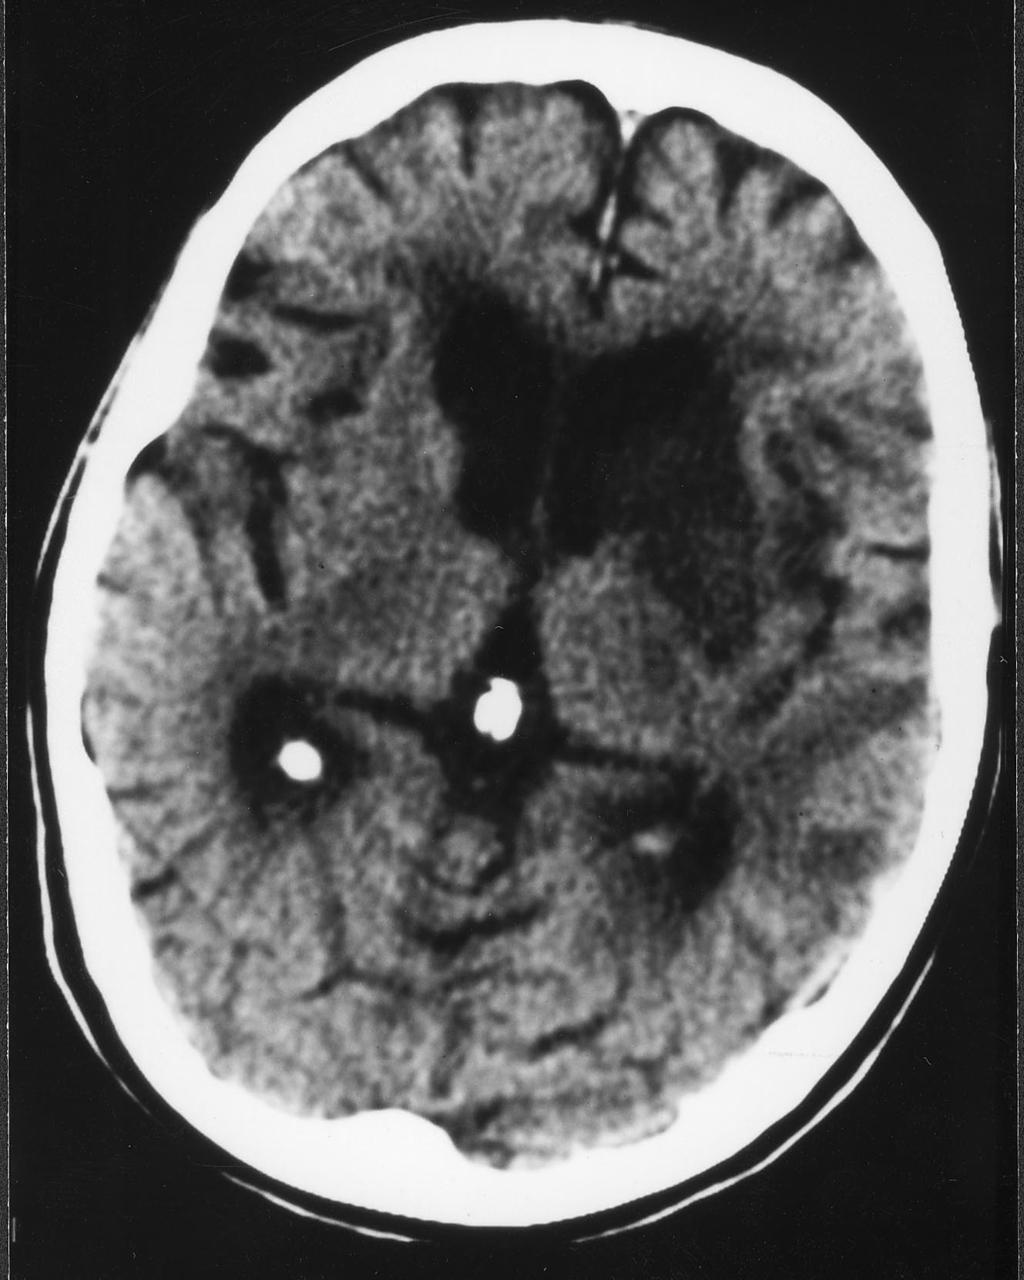 Sectc.qxd 29/06/99 09:43 Page 88 The central nervous system Cerebral infarction Fig. C7 CT scan of the brain showing a section at the level of the thalamus. There is a generalized atrophy noted.